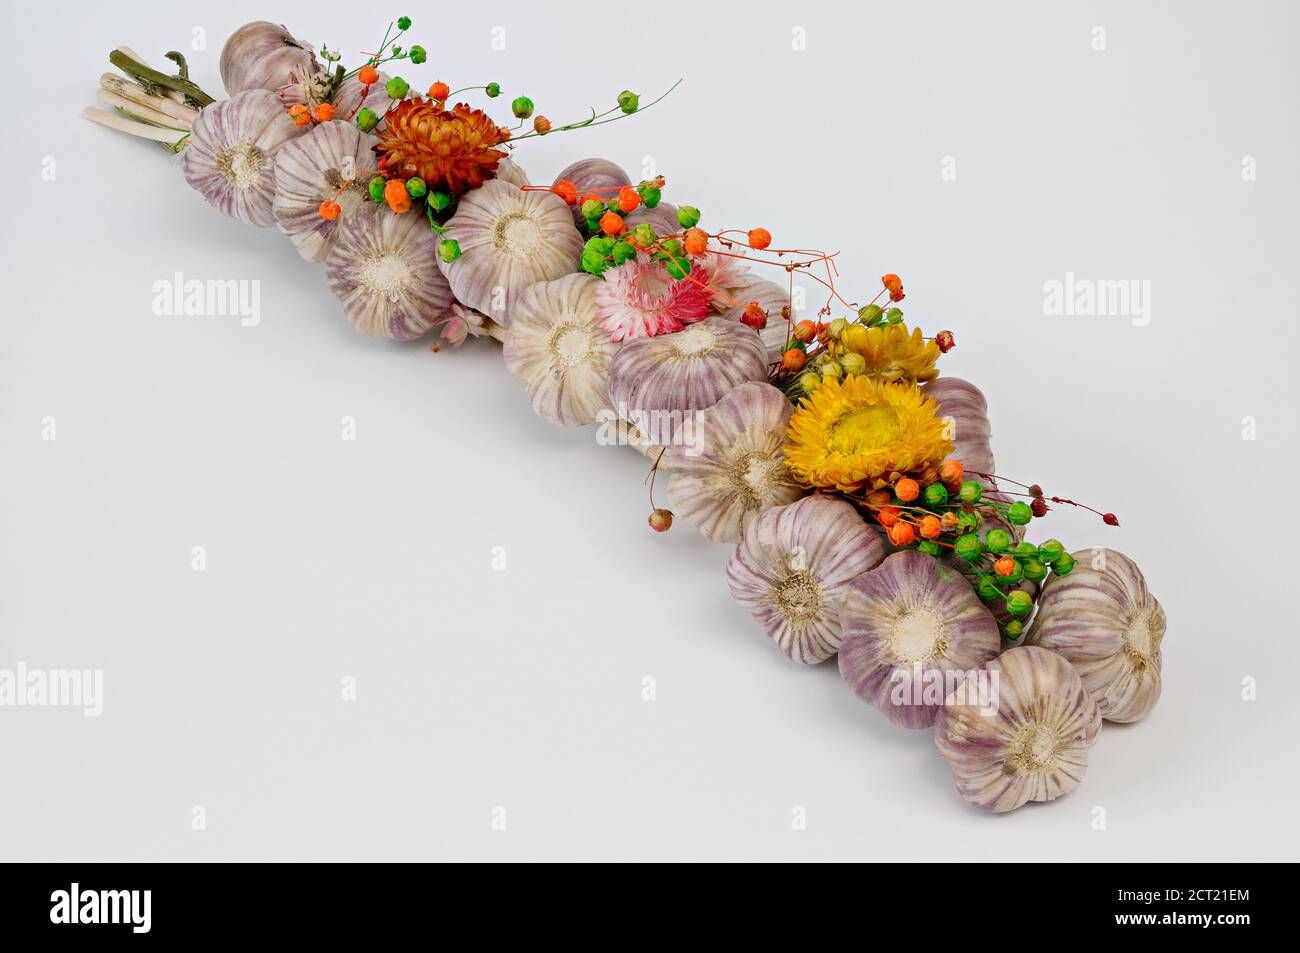 a braid of garlic, decorated with flowers, against a light background, photographed close up Stock Photo